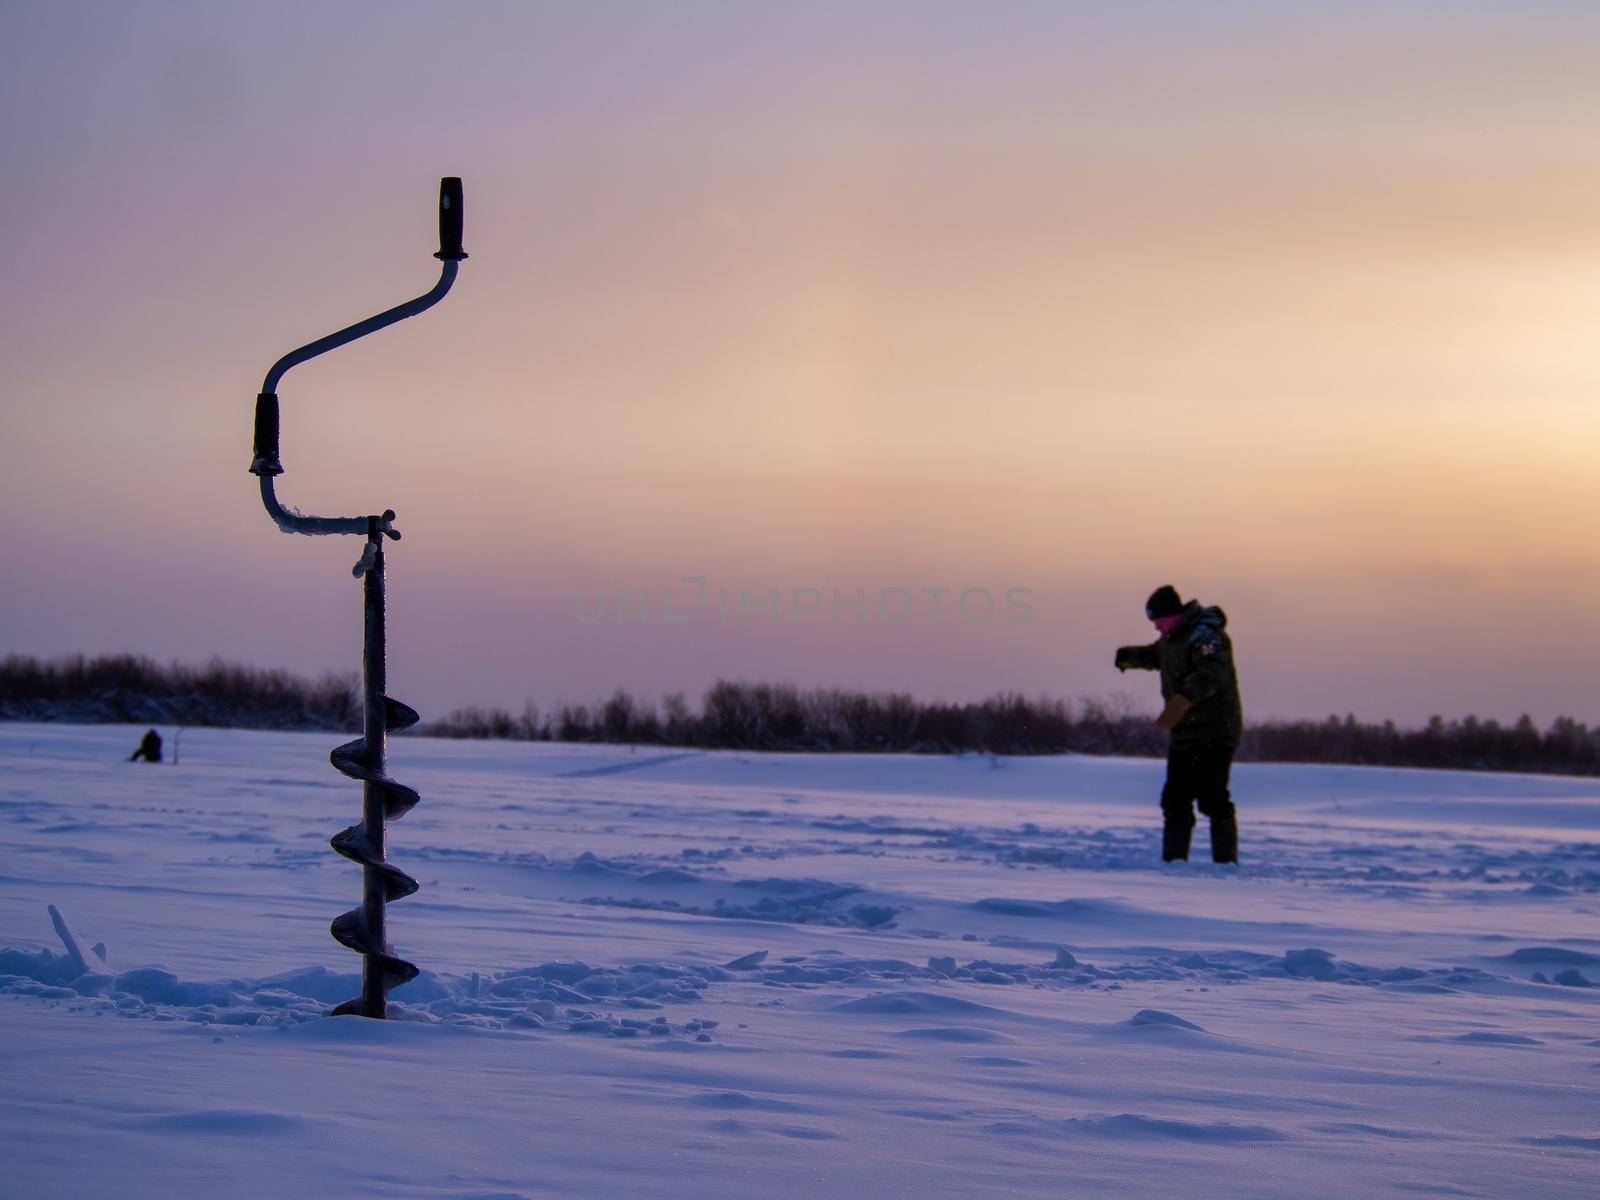 Ice drill on a frozen lake with a fisherman in the background. by Andre1ns